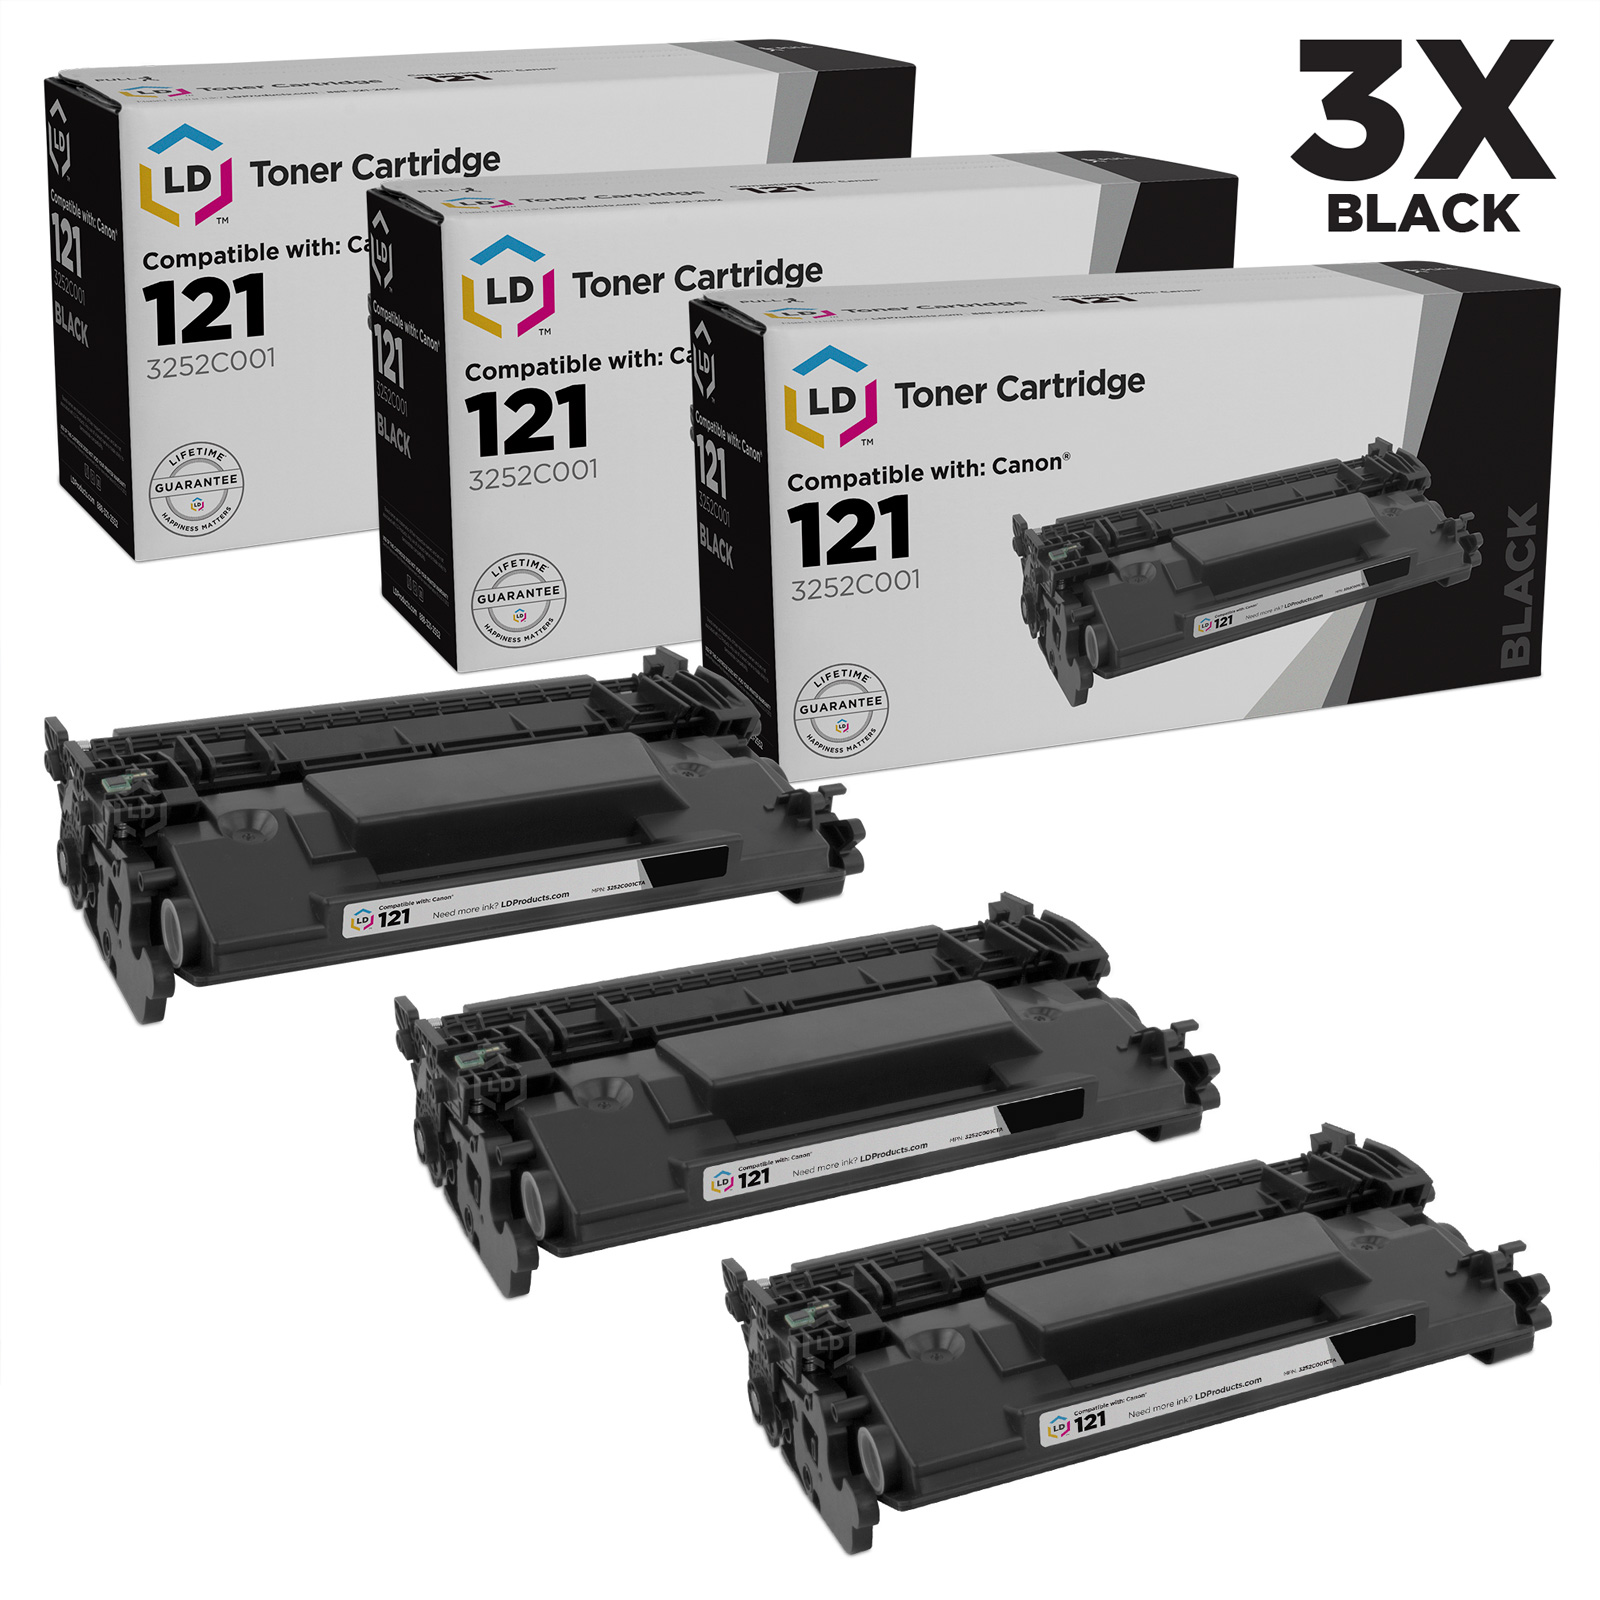 LD Compatible Replacement for Canon 121 / 3252C001 High Capacity Black Toner Cartridges 3-Pack for imageCLASS D1620, D1650 - image 1 of 1